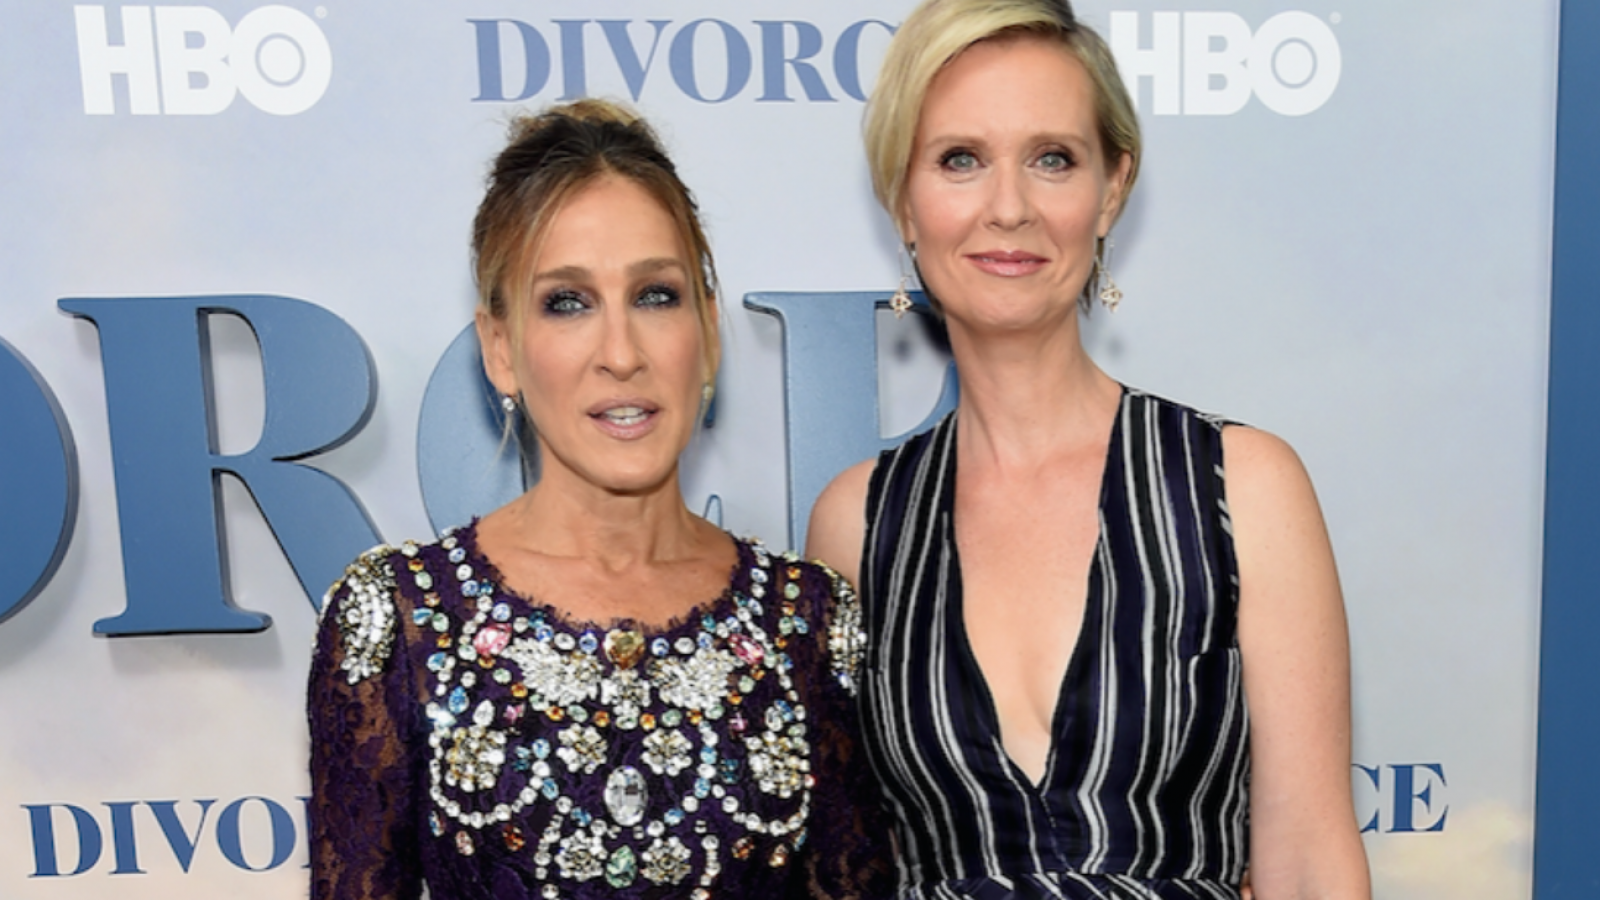 Sarah Jessica Parker Looks Forward to 'Sister' Cynthia Nixon's Run for Governor